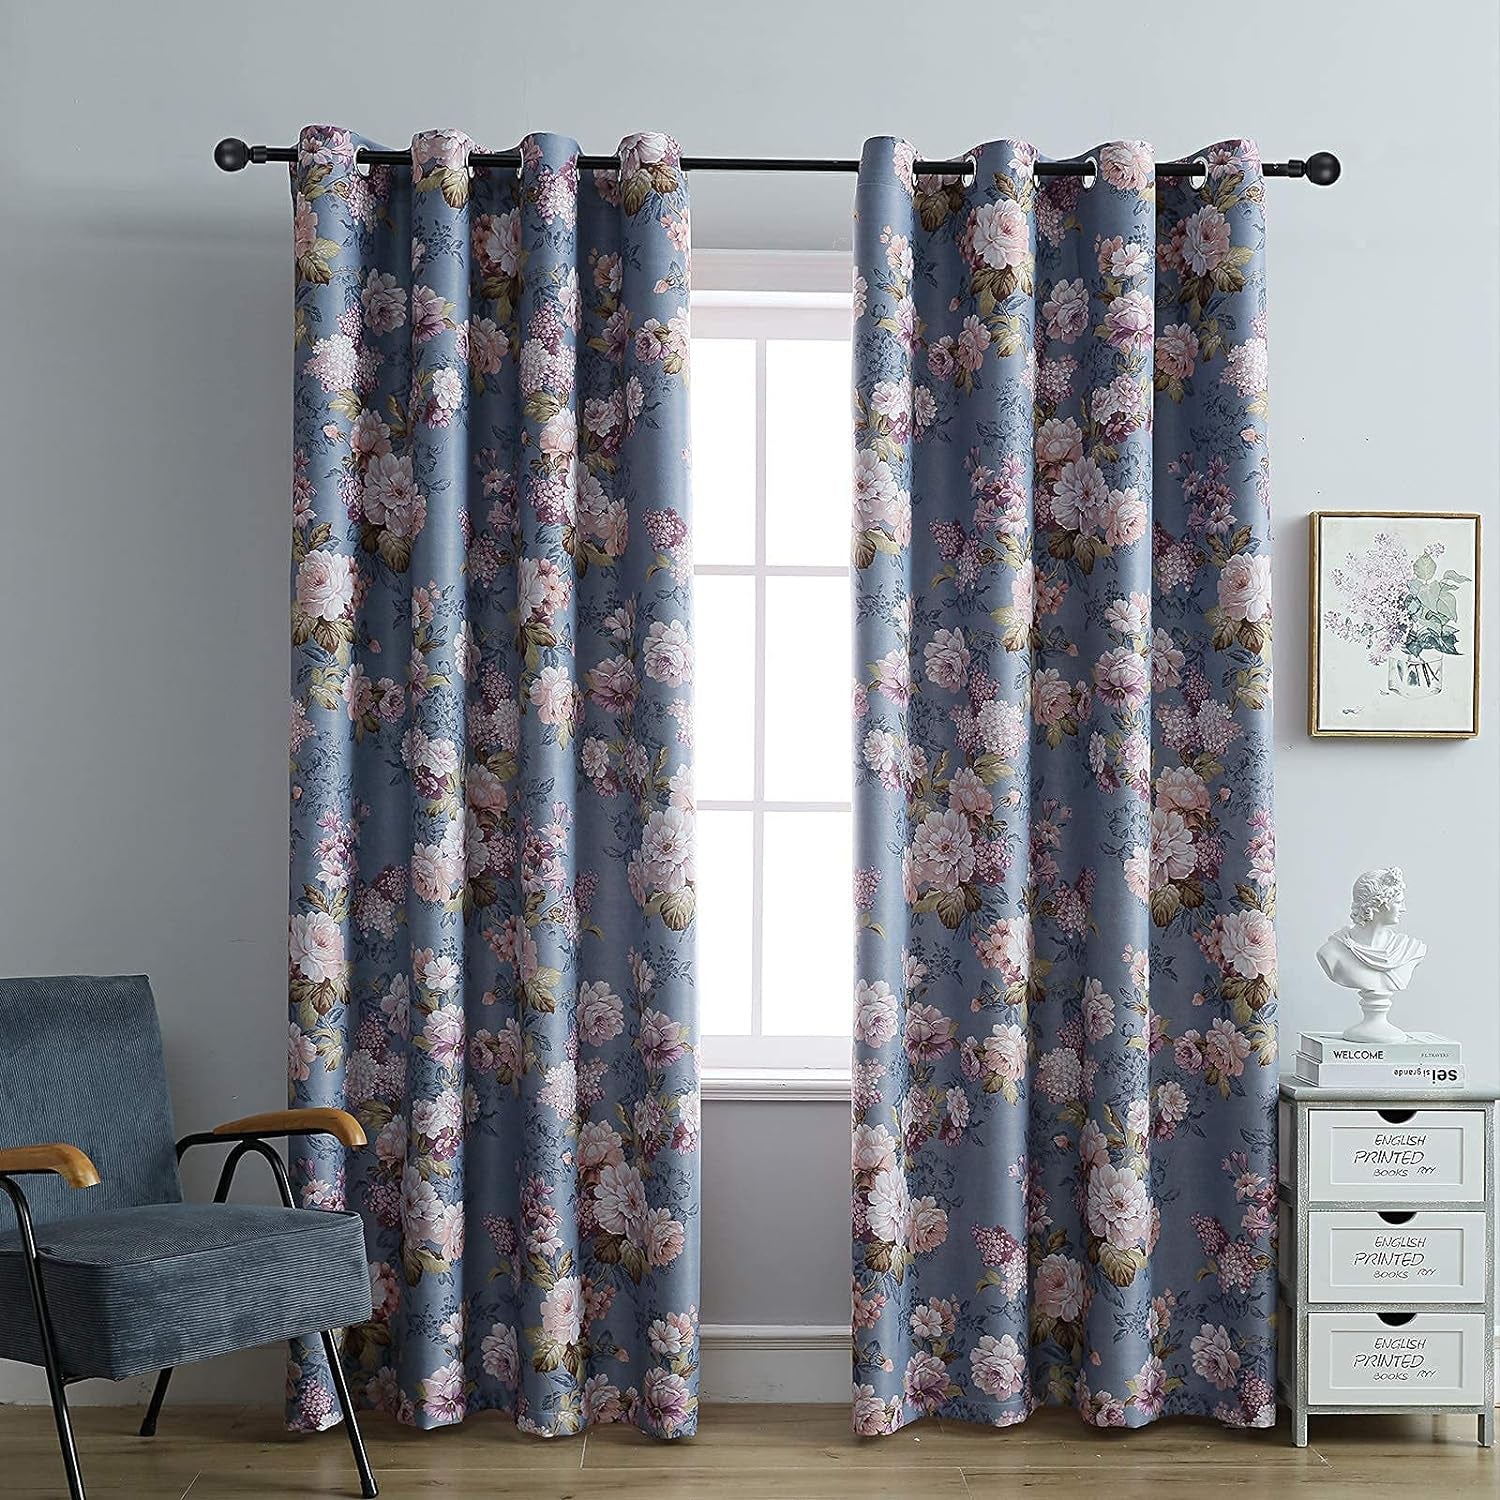 Double Sided Floral Blackout Curtains for Bedroom Patterned Vintage Flower Thermal Insulated Window Drapes Room Darkening for Living Room 2 Panels 84 Inches Long Blue  SUOUO   